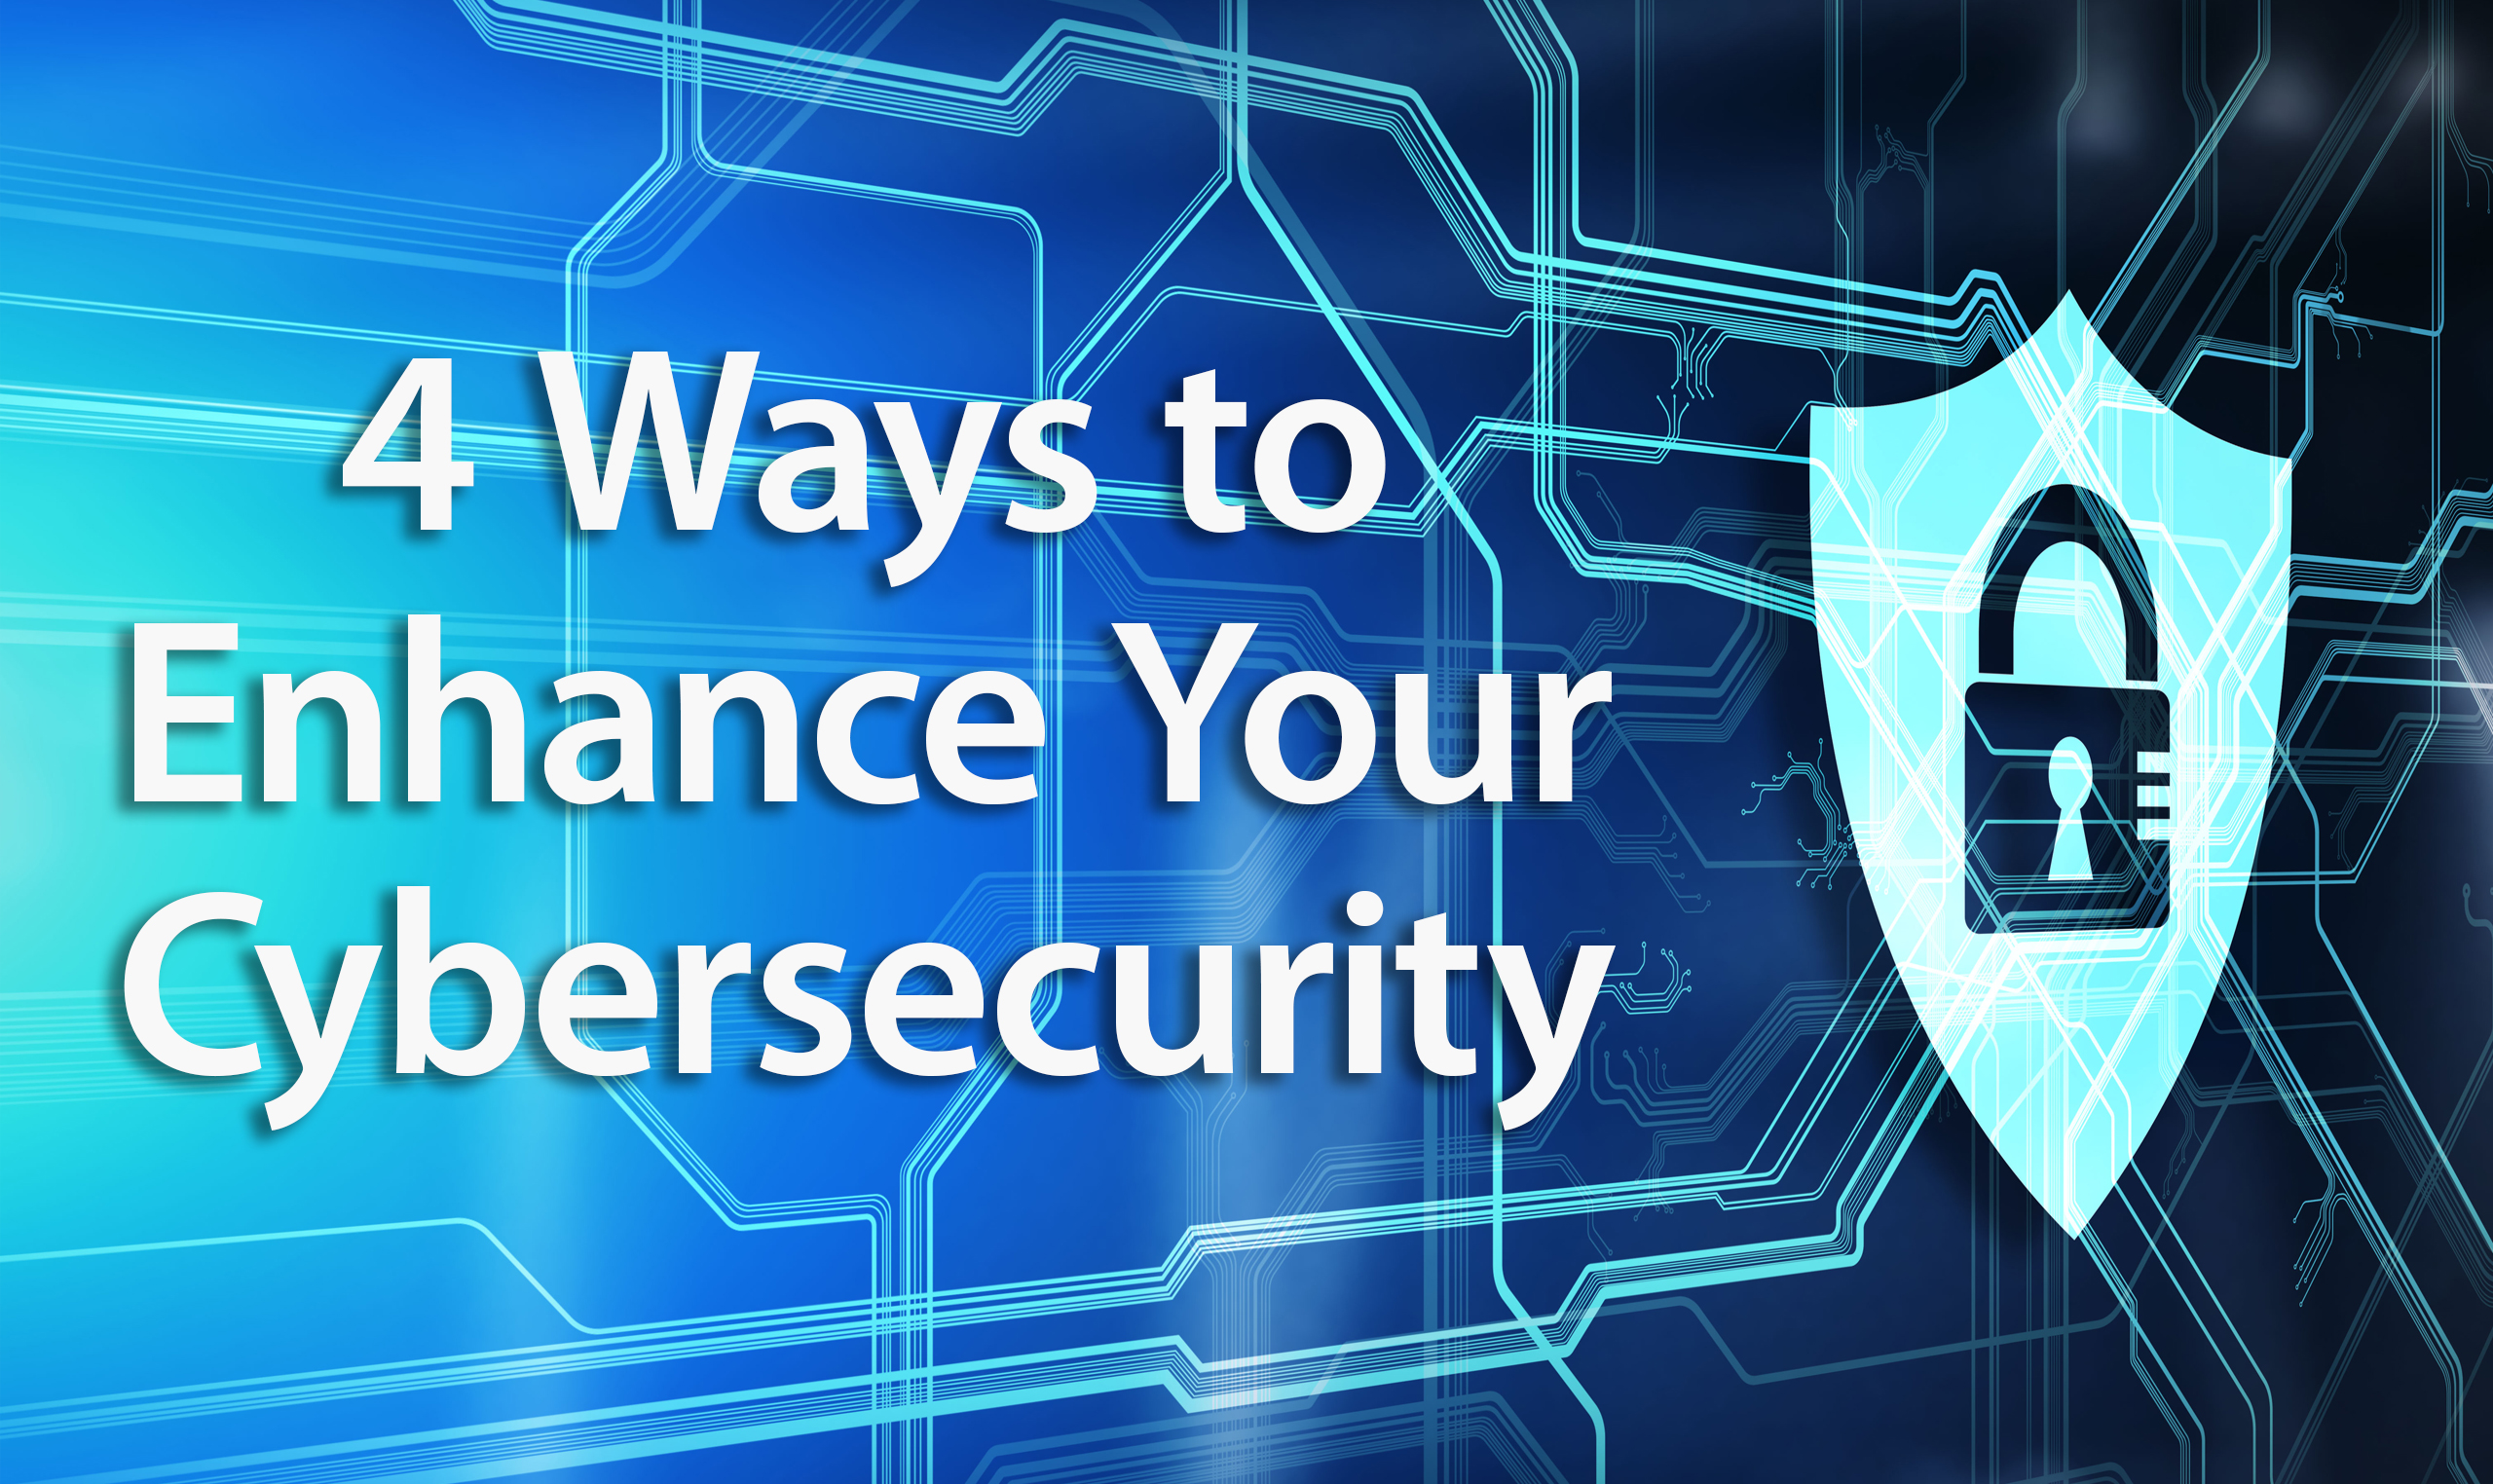 4 Ways to Enhance Your Cybersecurity